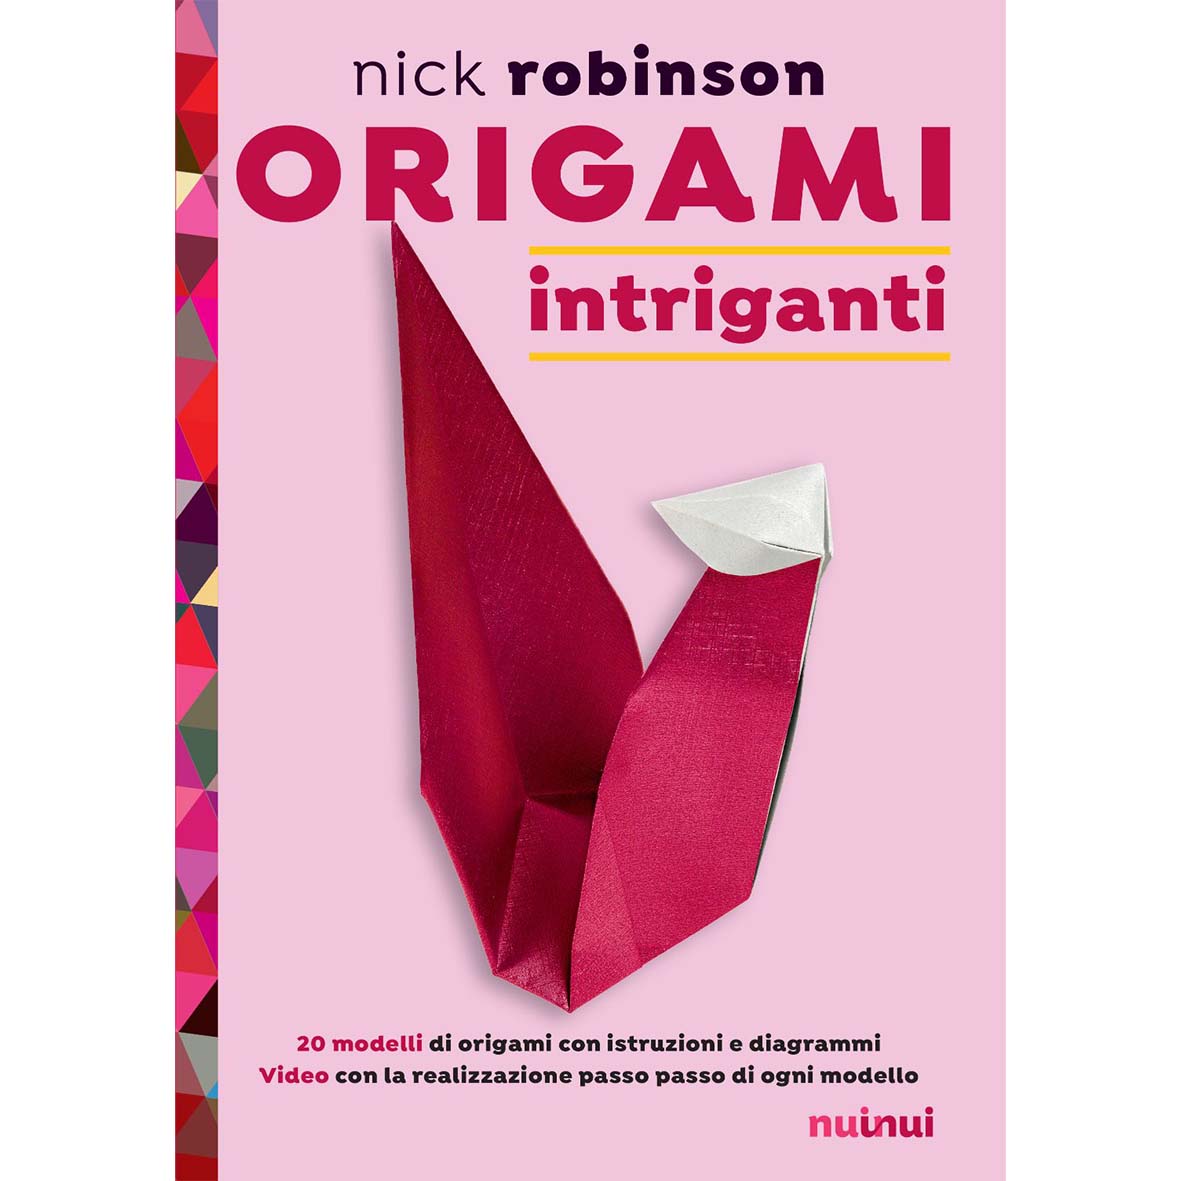 Intriguing origami - new edition